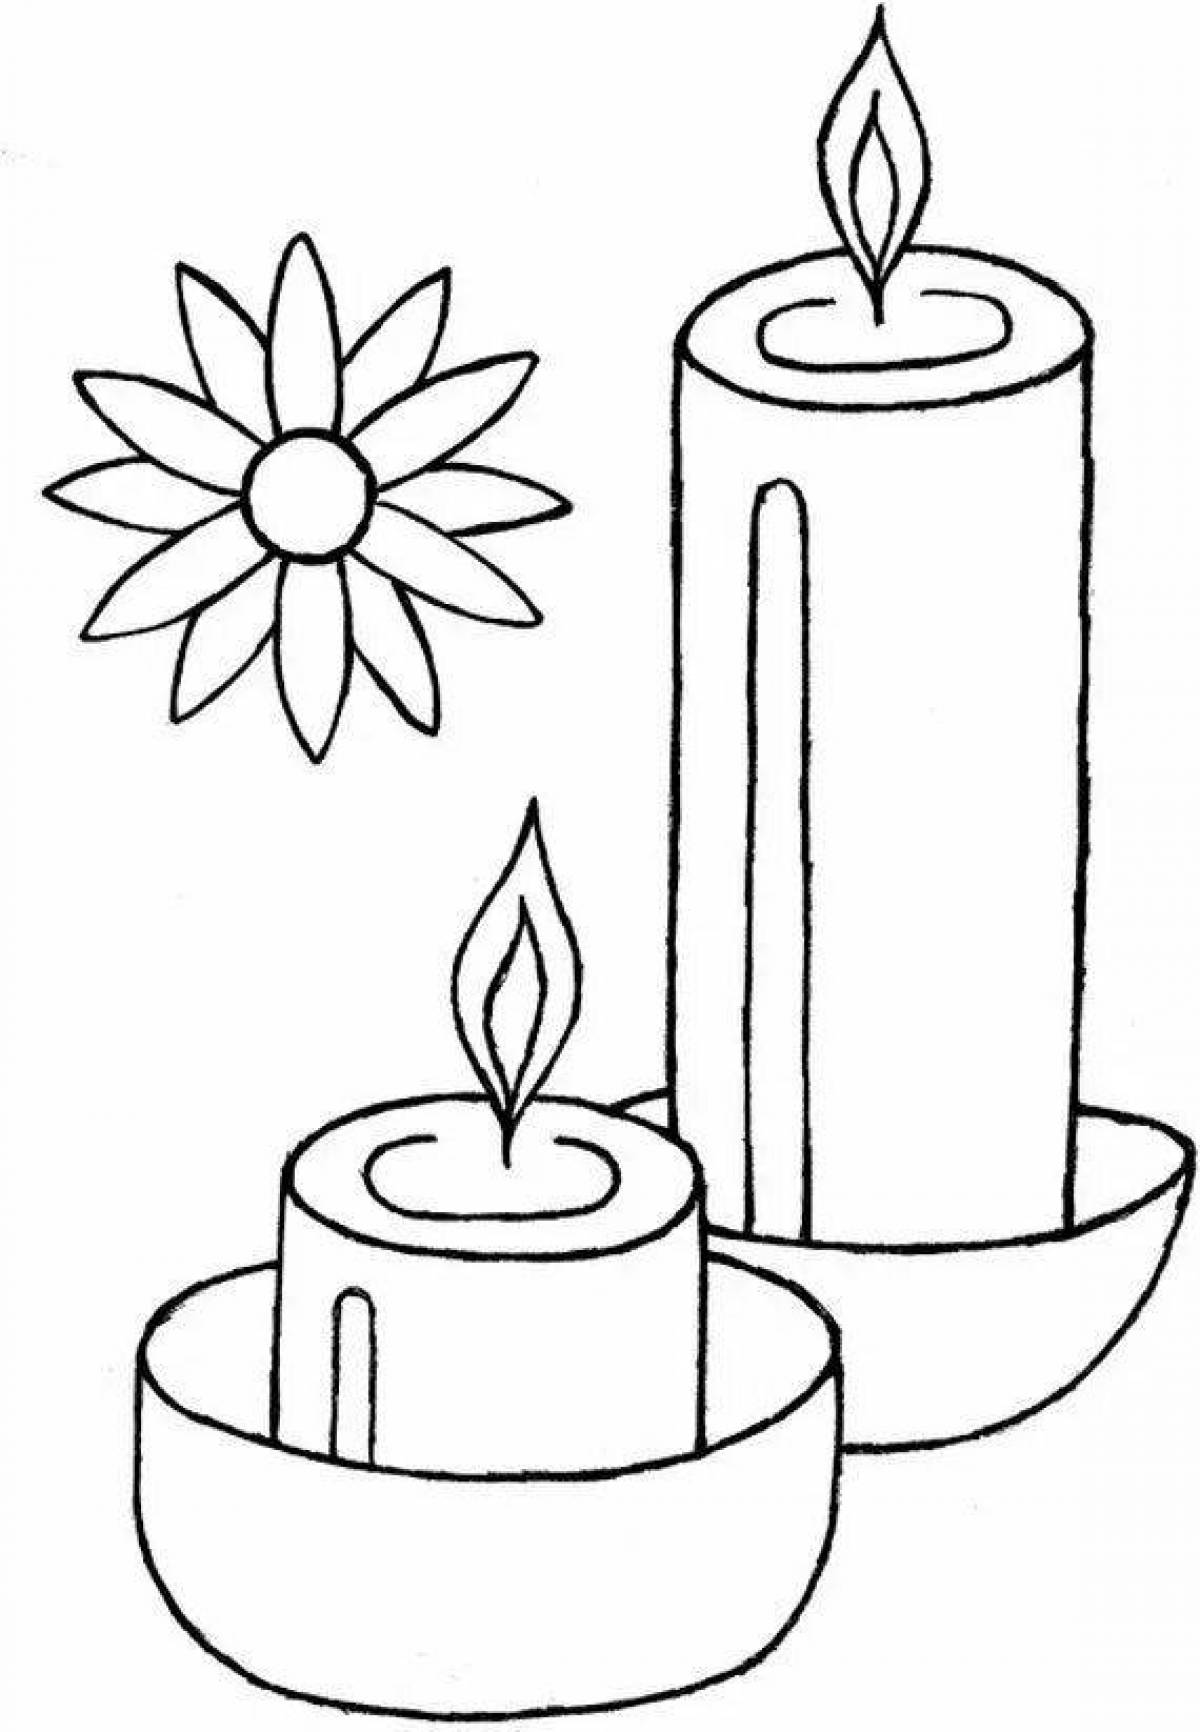 Remembrance Candle #3